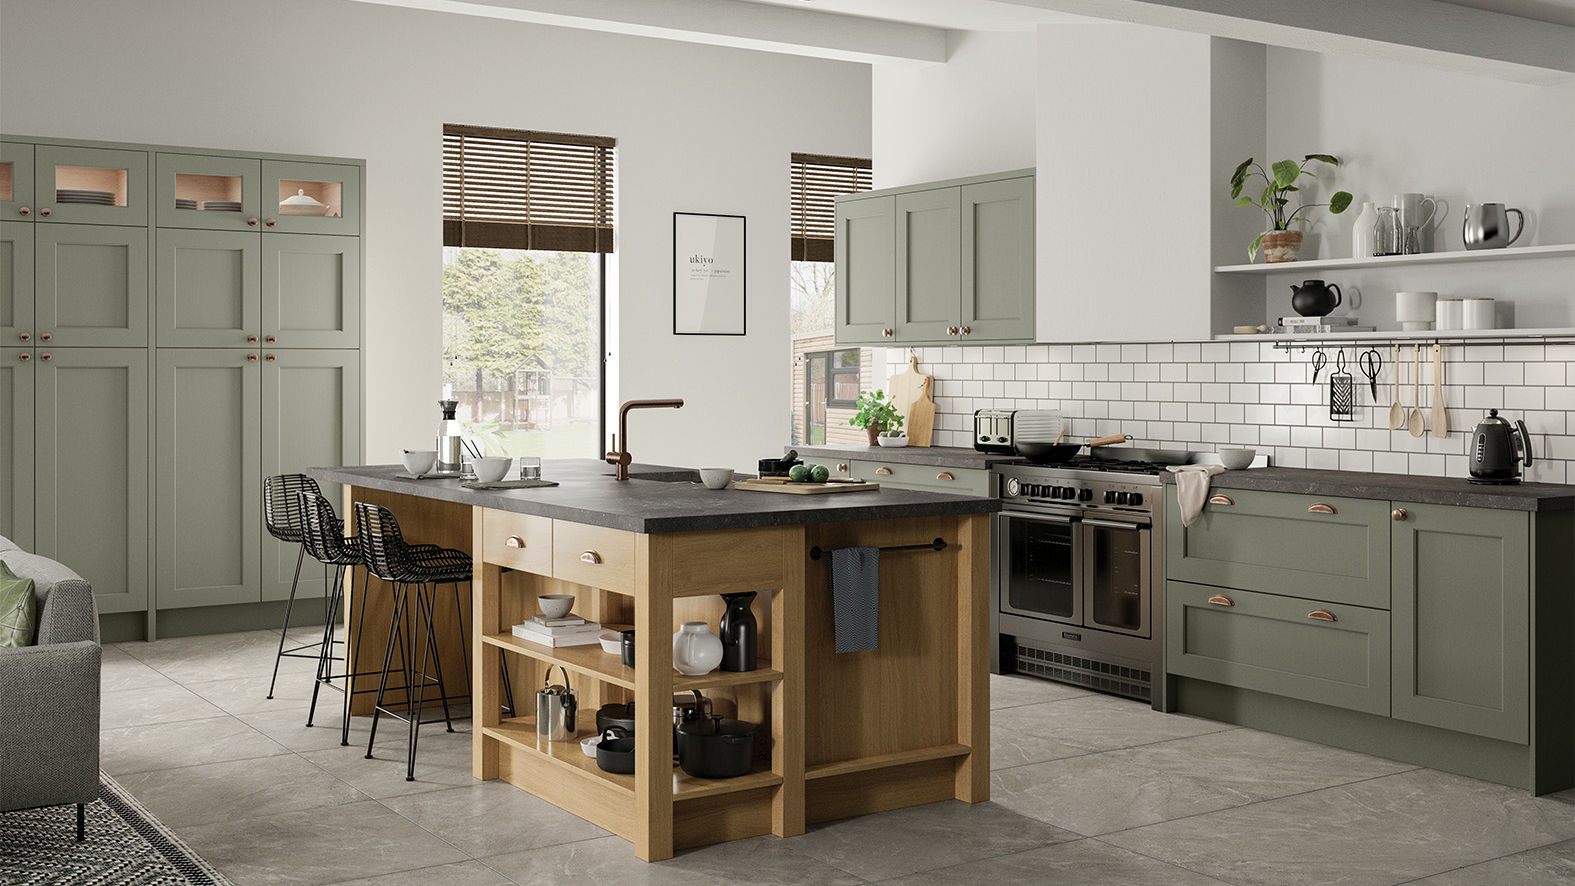 Wakefield Solid Wood Cardamon kitchens highlighting traditional craftsmanship in a warm, spicy green shade